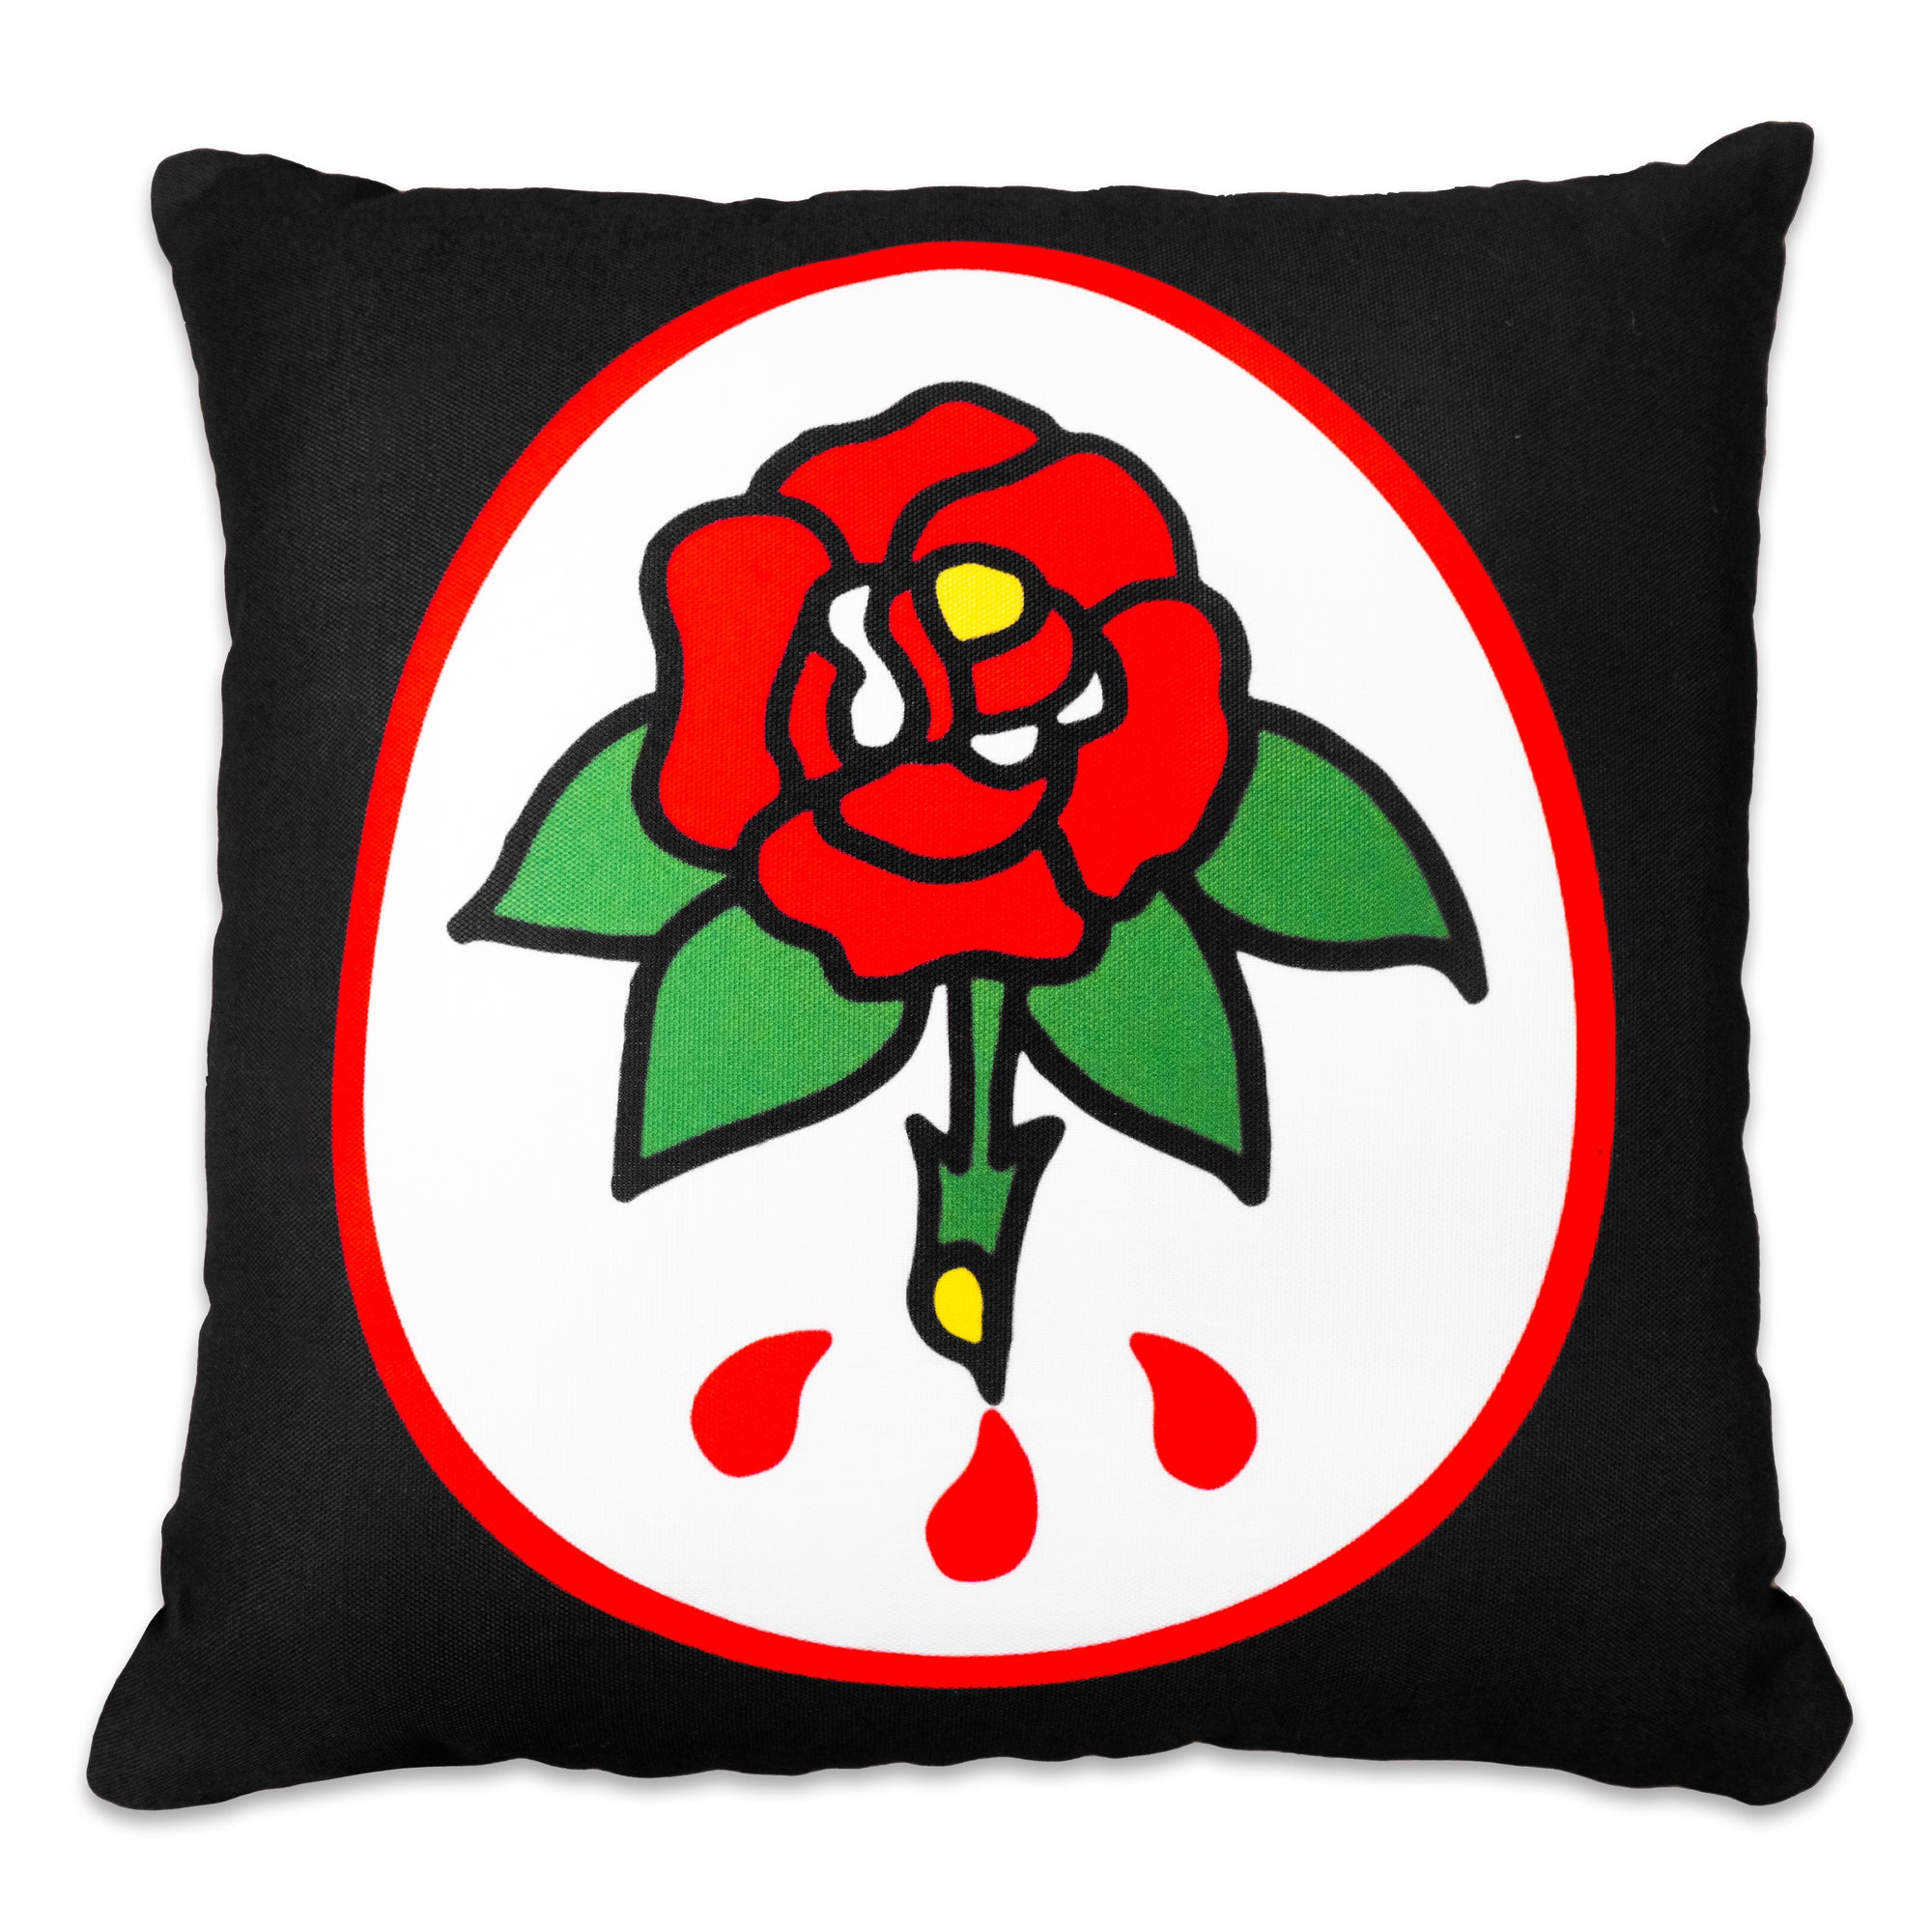 The "Sword & Rose" Pillow by No Fun®. Pillow is black, with a double sided design. One side has a red and white oval, with a cartoon rose in the center.  The rose is red, and has 4 green leaves and a green stem.  There are 3 red drips near the bottom of the stem.